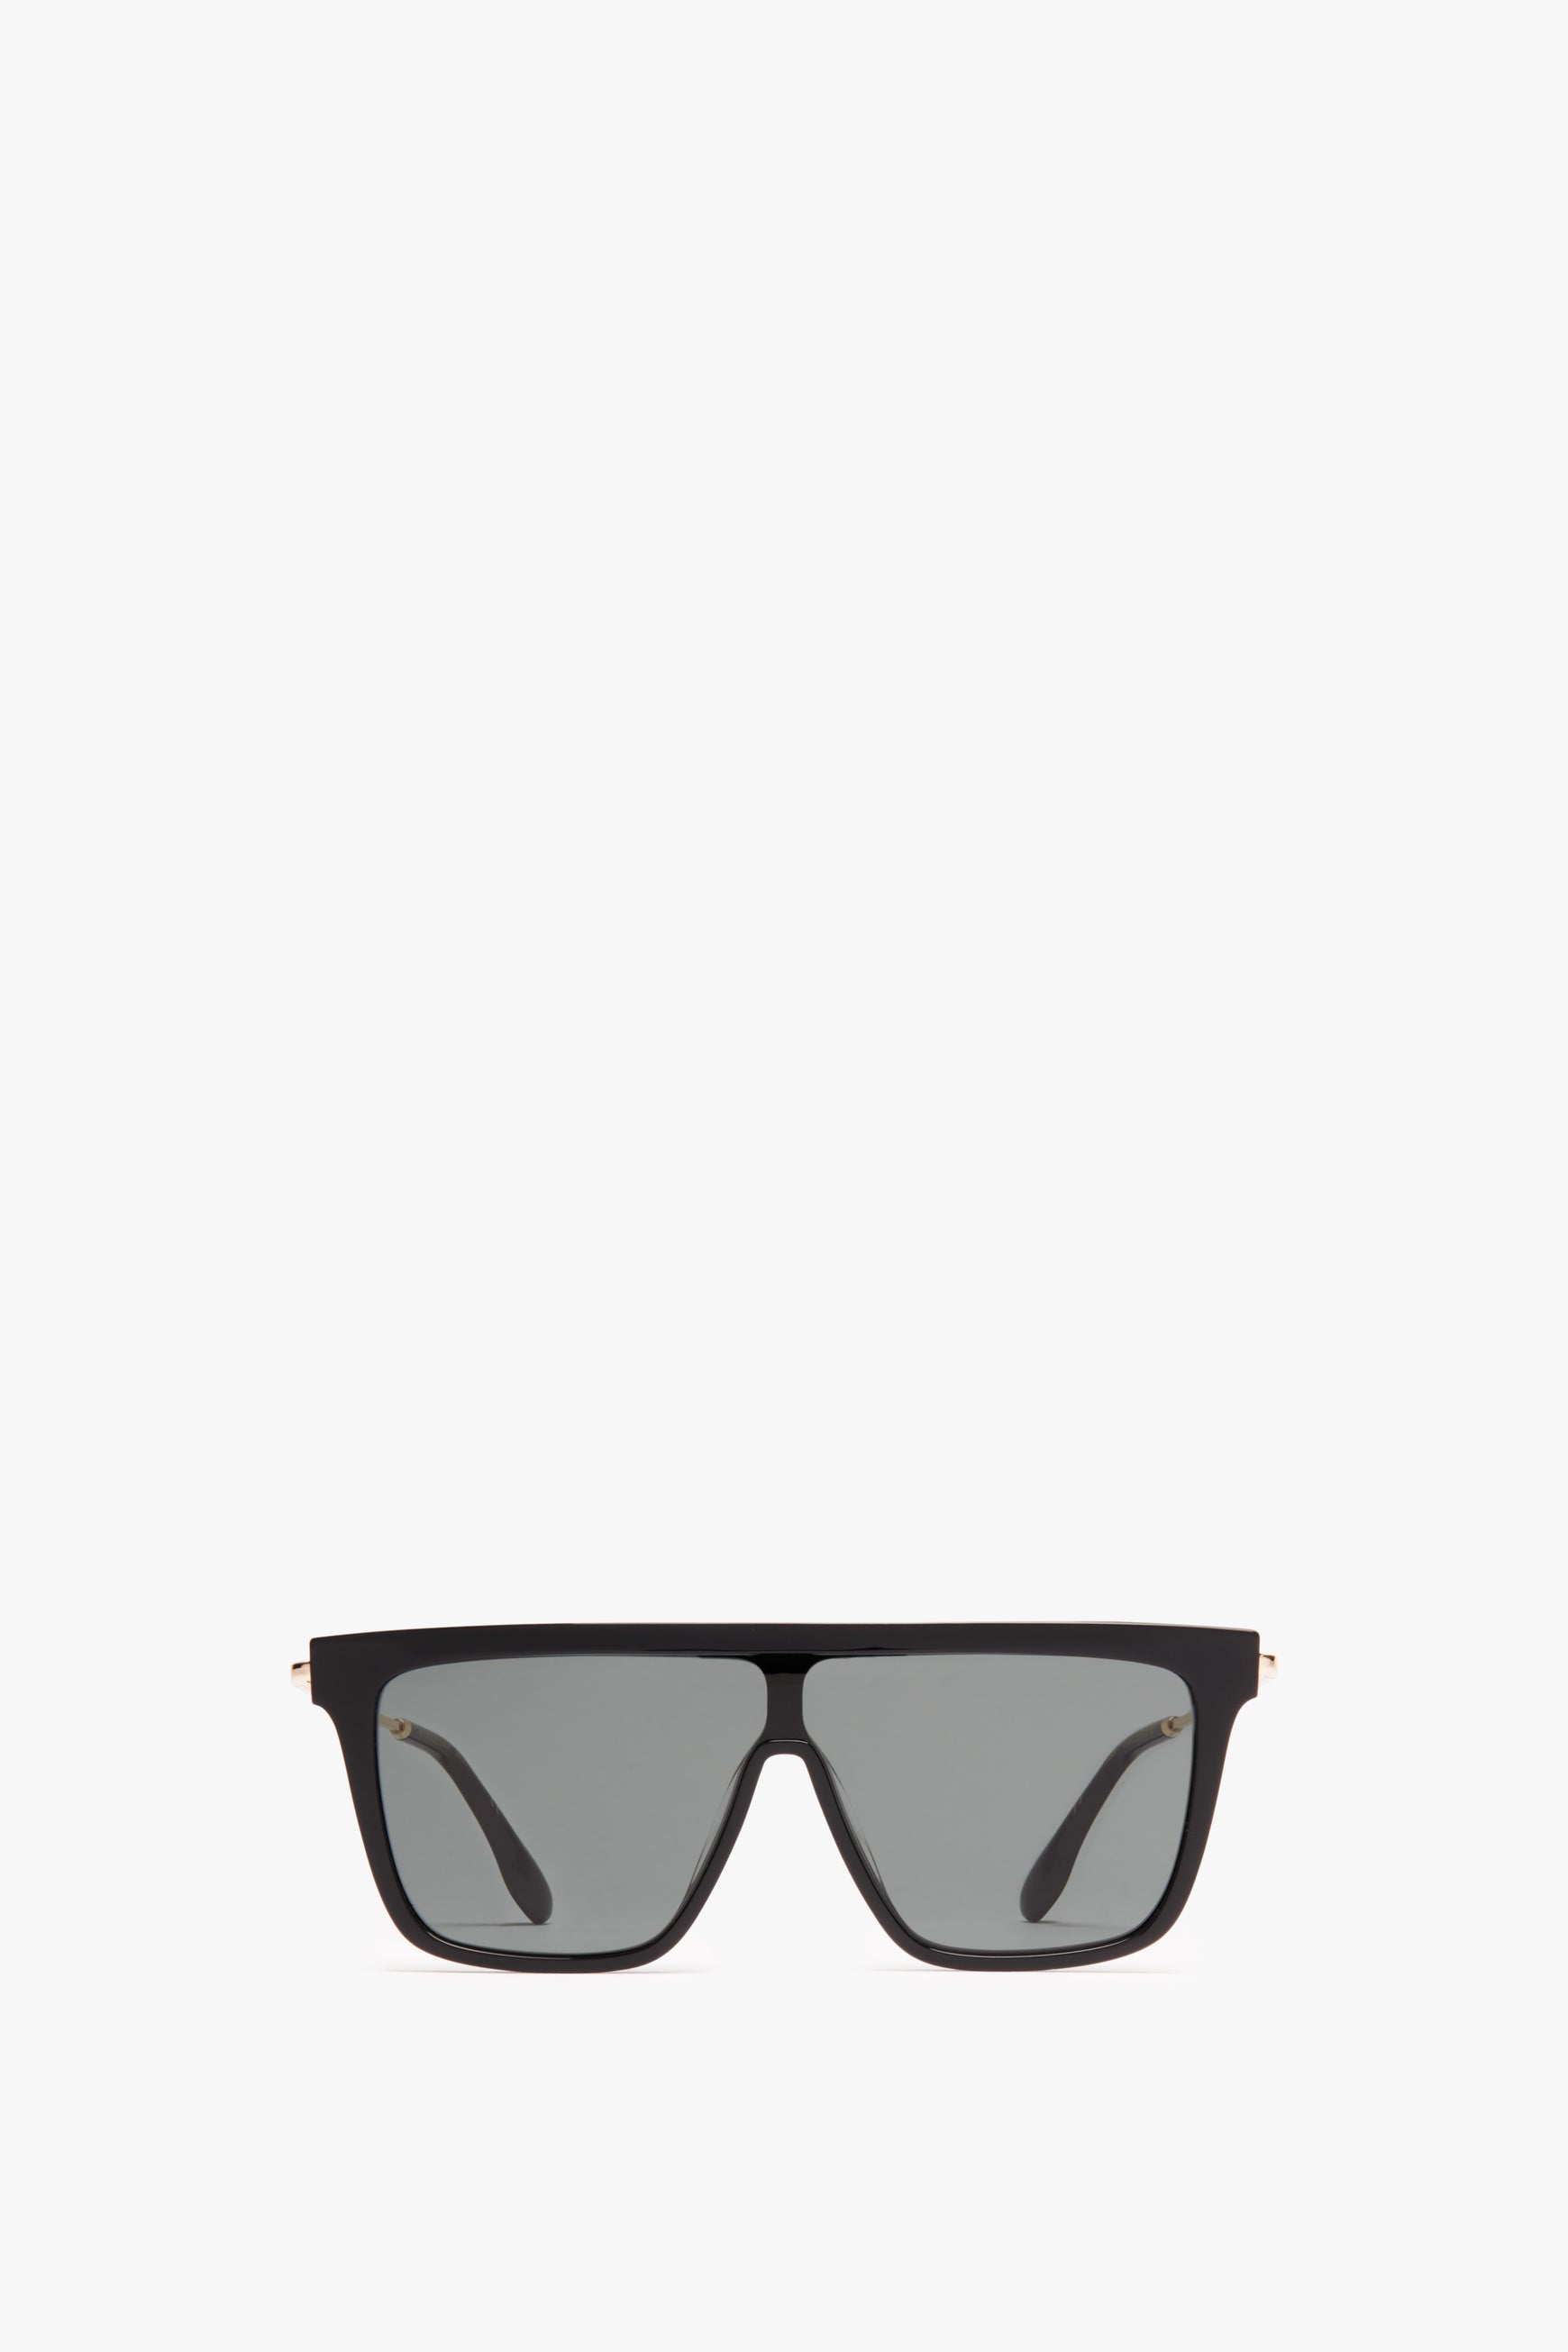 A pair of Victoria Beckham Rectangular Shield Sunglasses in Black with gray lenses on a white background.